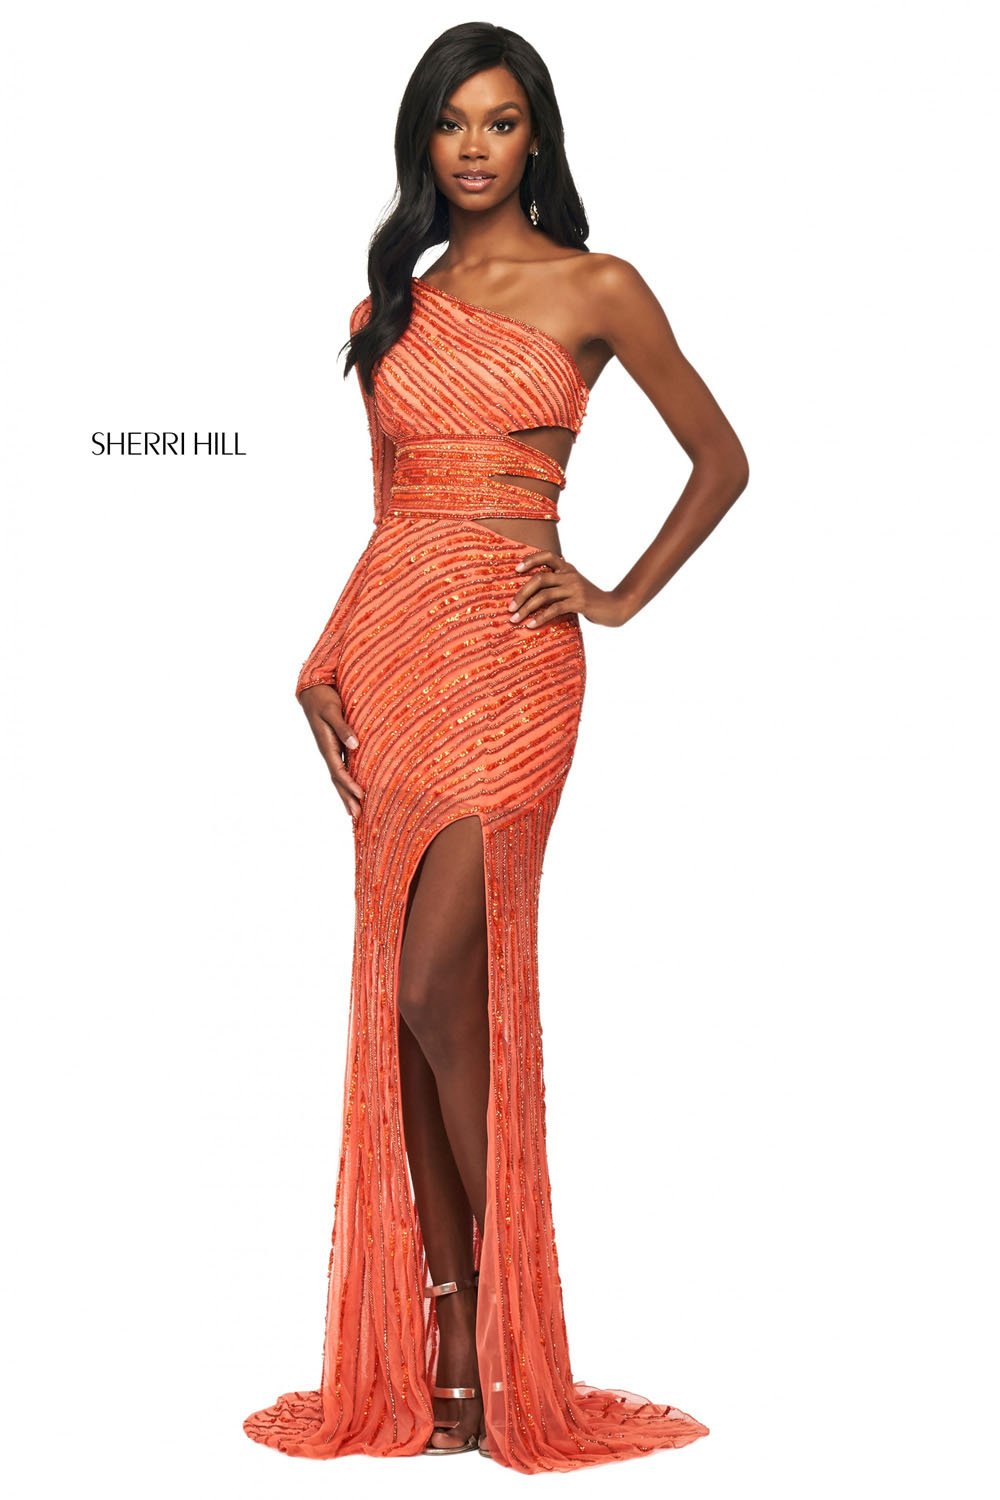 Sherri Hill 53884 dress images in these colors: Silver, Gold, Emerald, Orange.